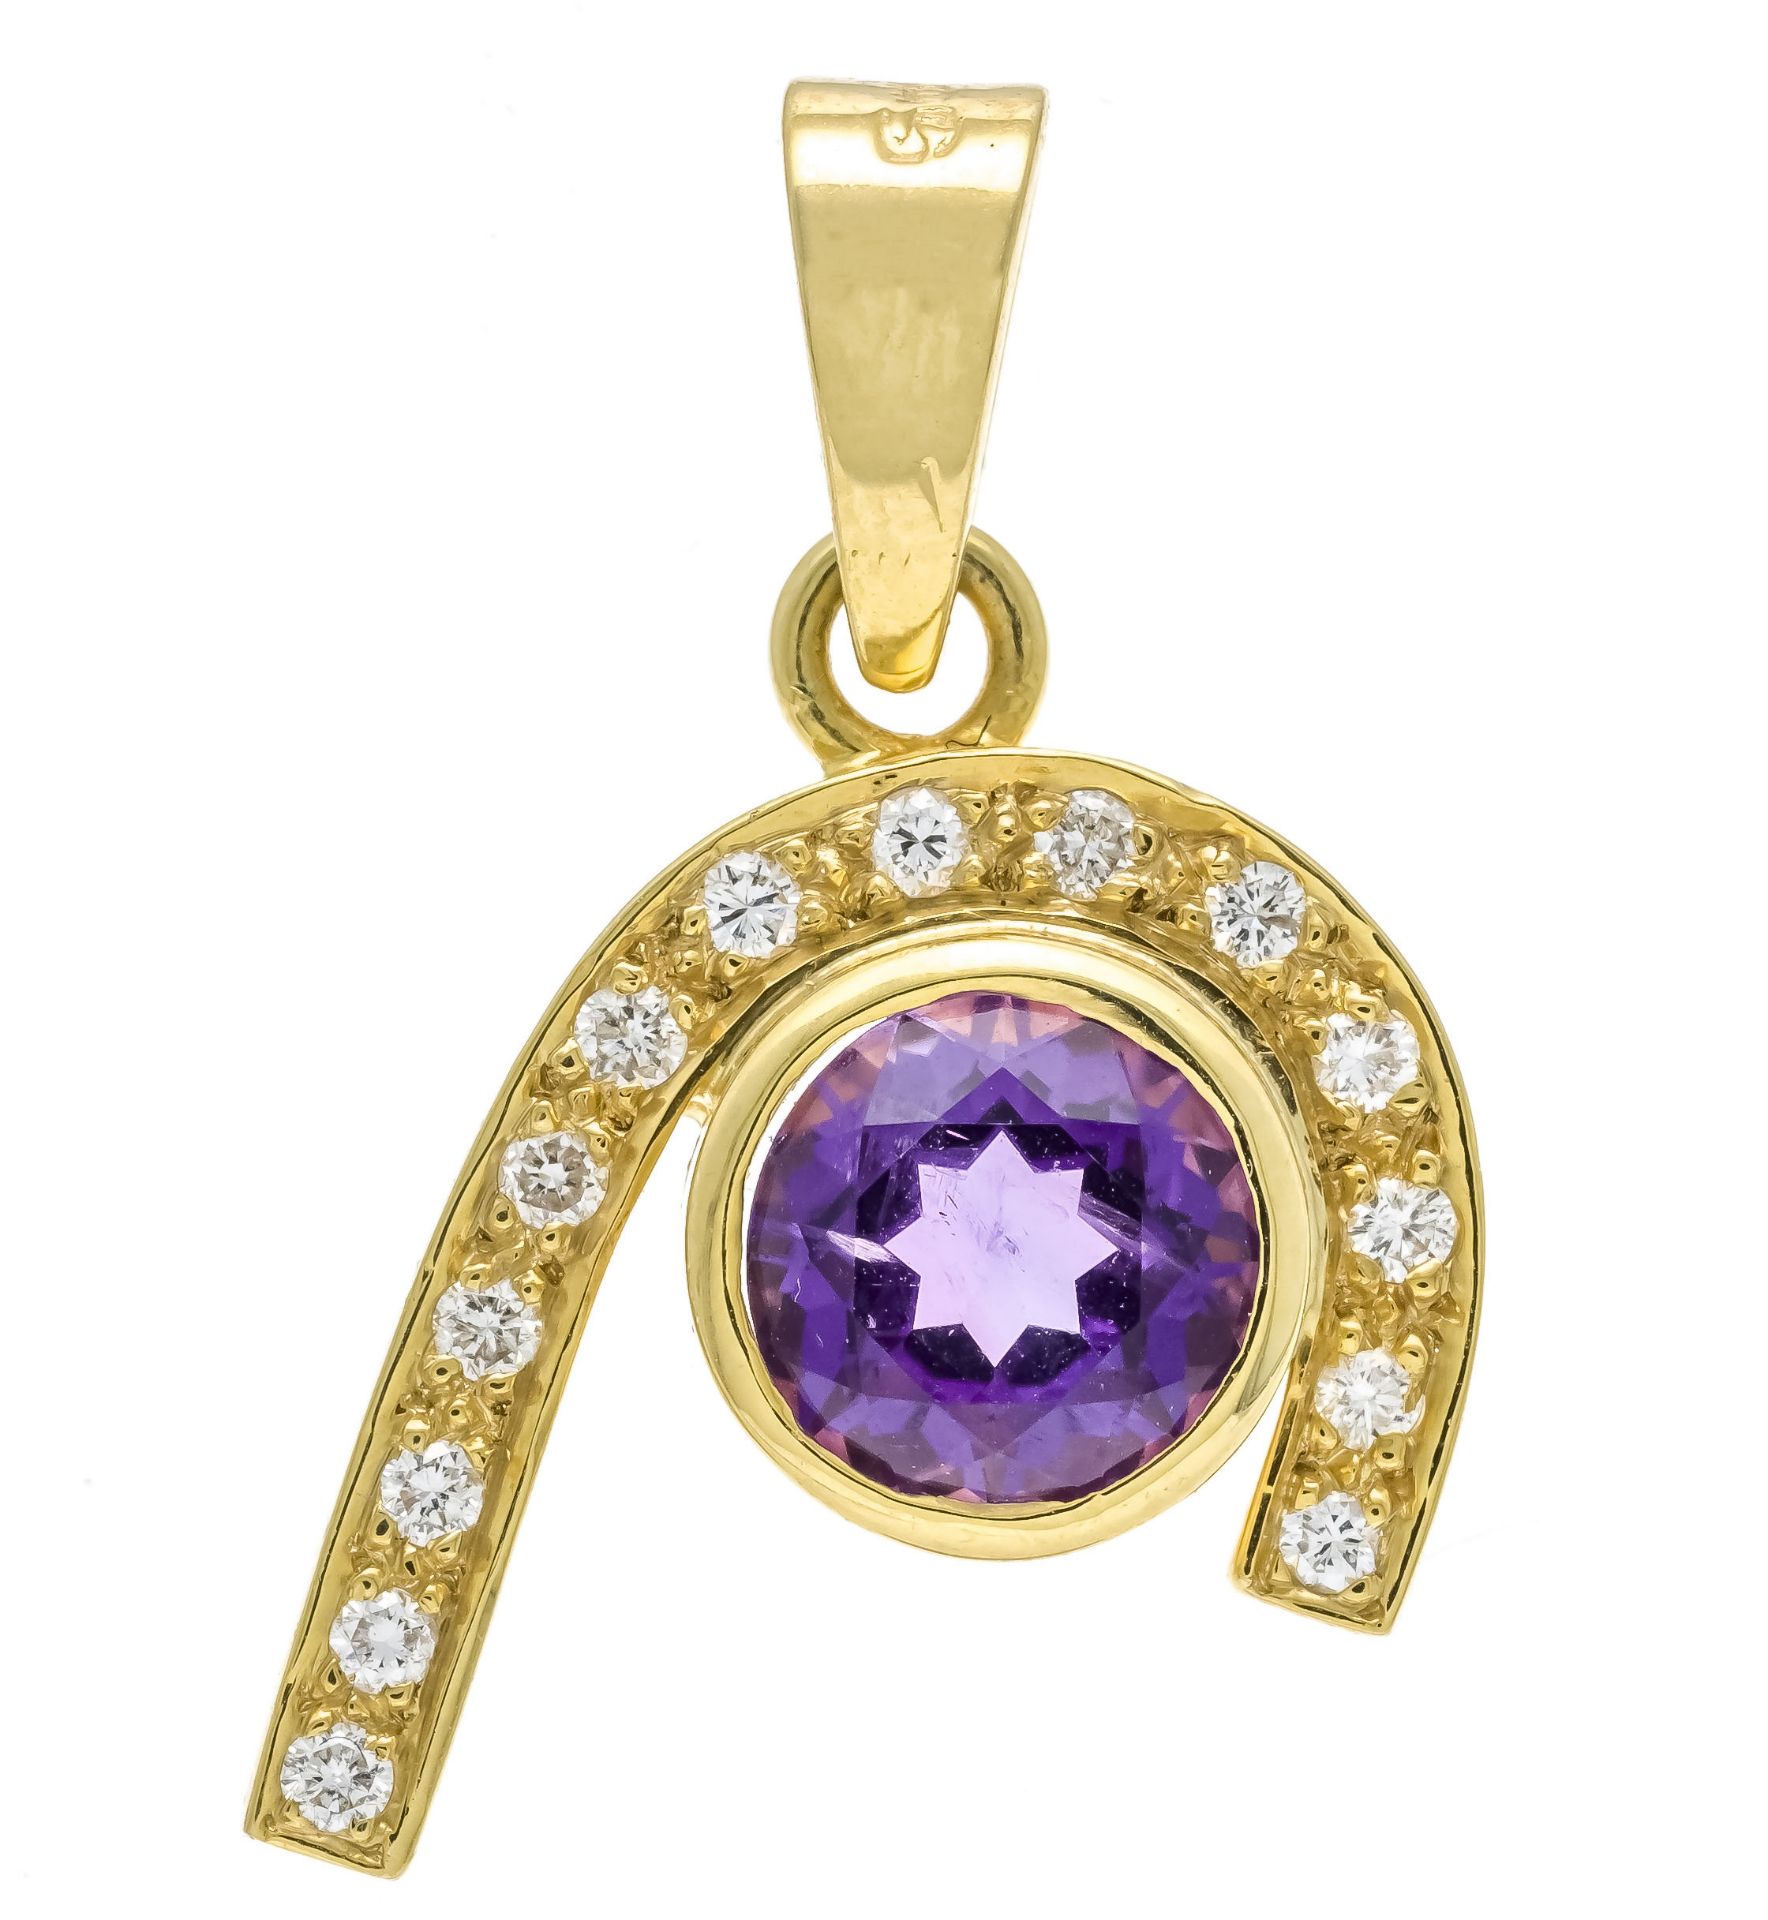 Amethyst-brilliant pendant GG 585/000 with a round faceted amethyst 7.4 mm and 14 brilliant-cut